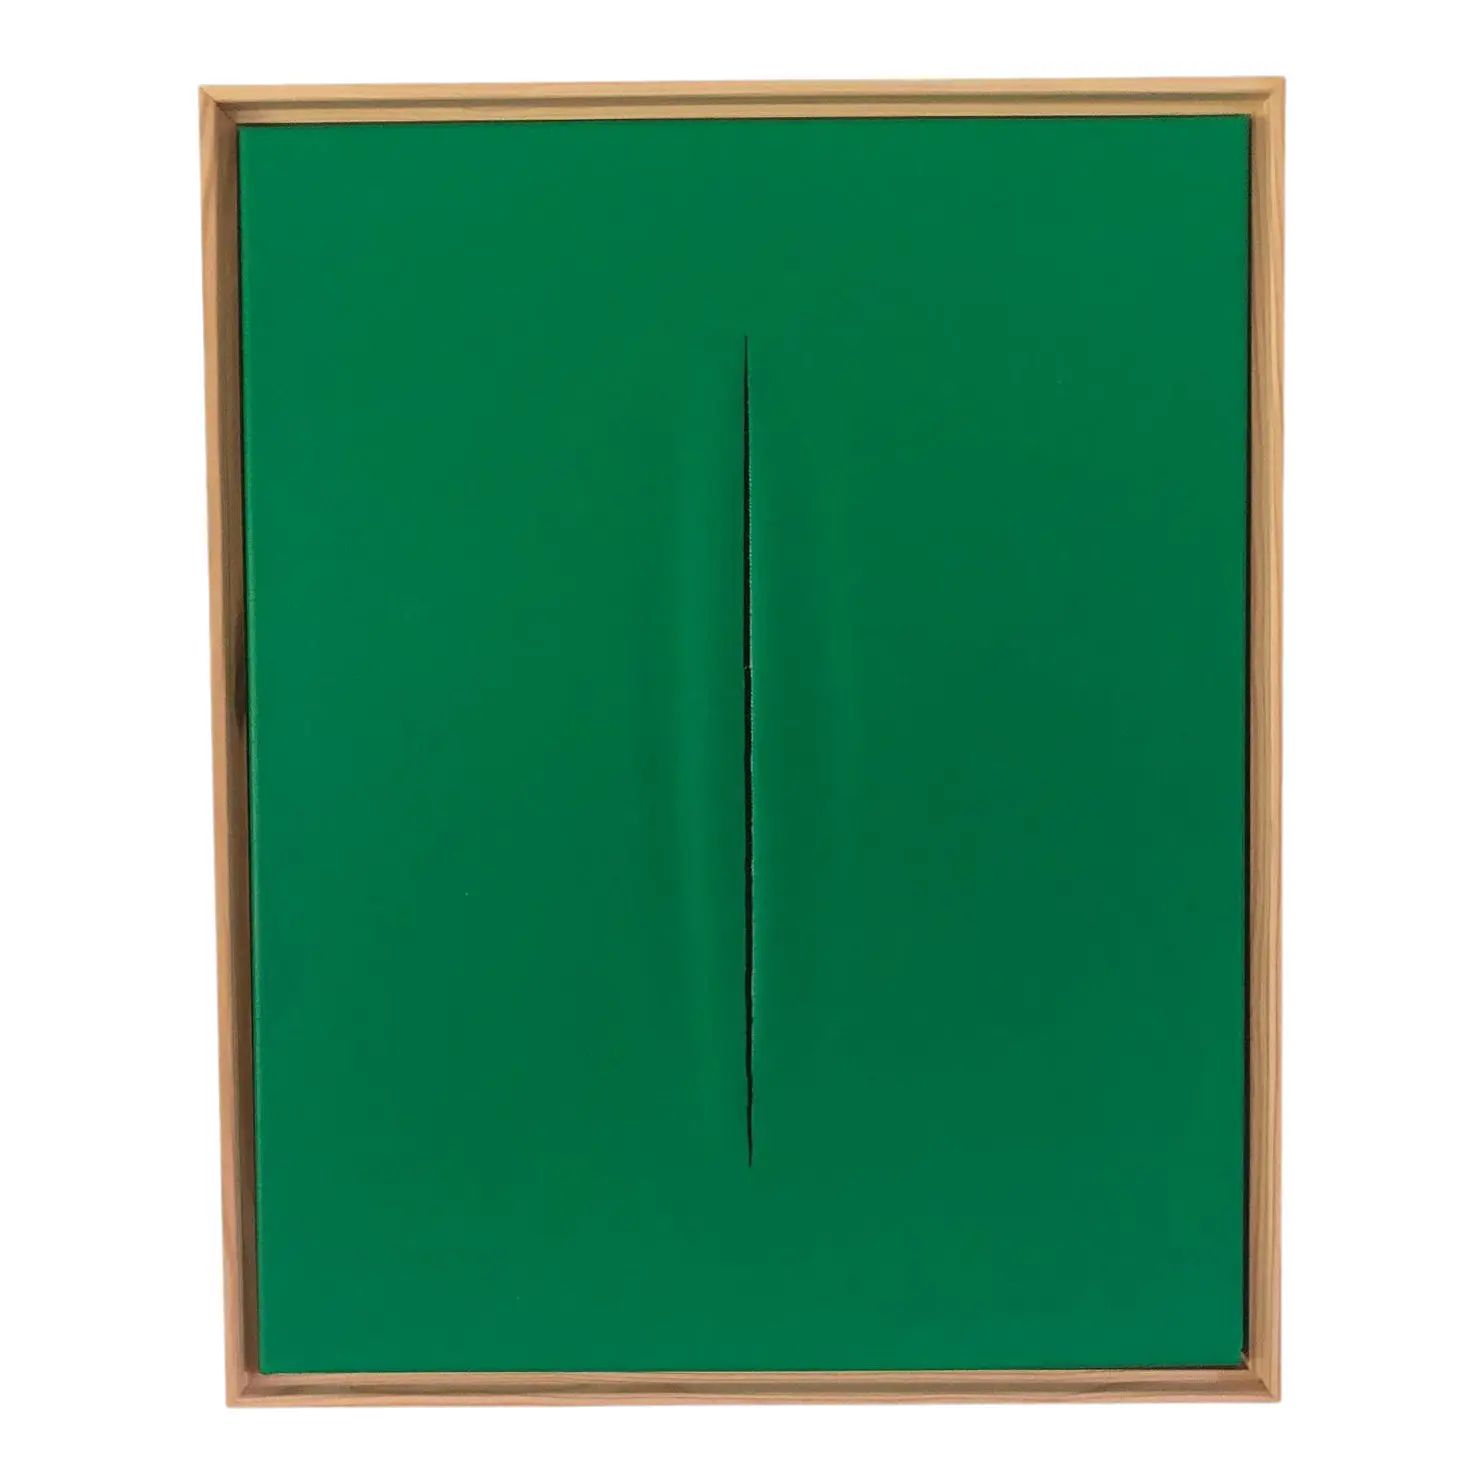 Green Slice Modern Painting by Tony Curry | Chairish